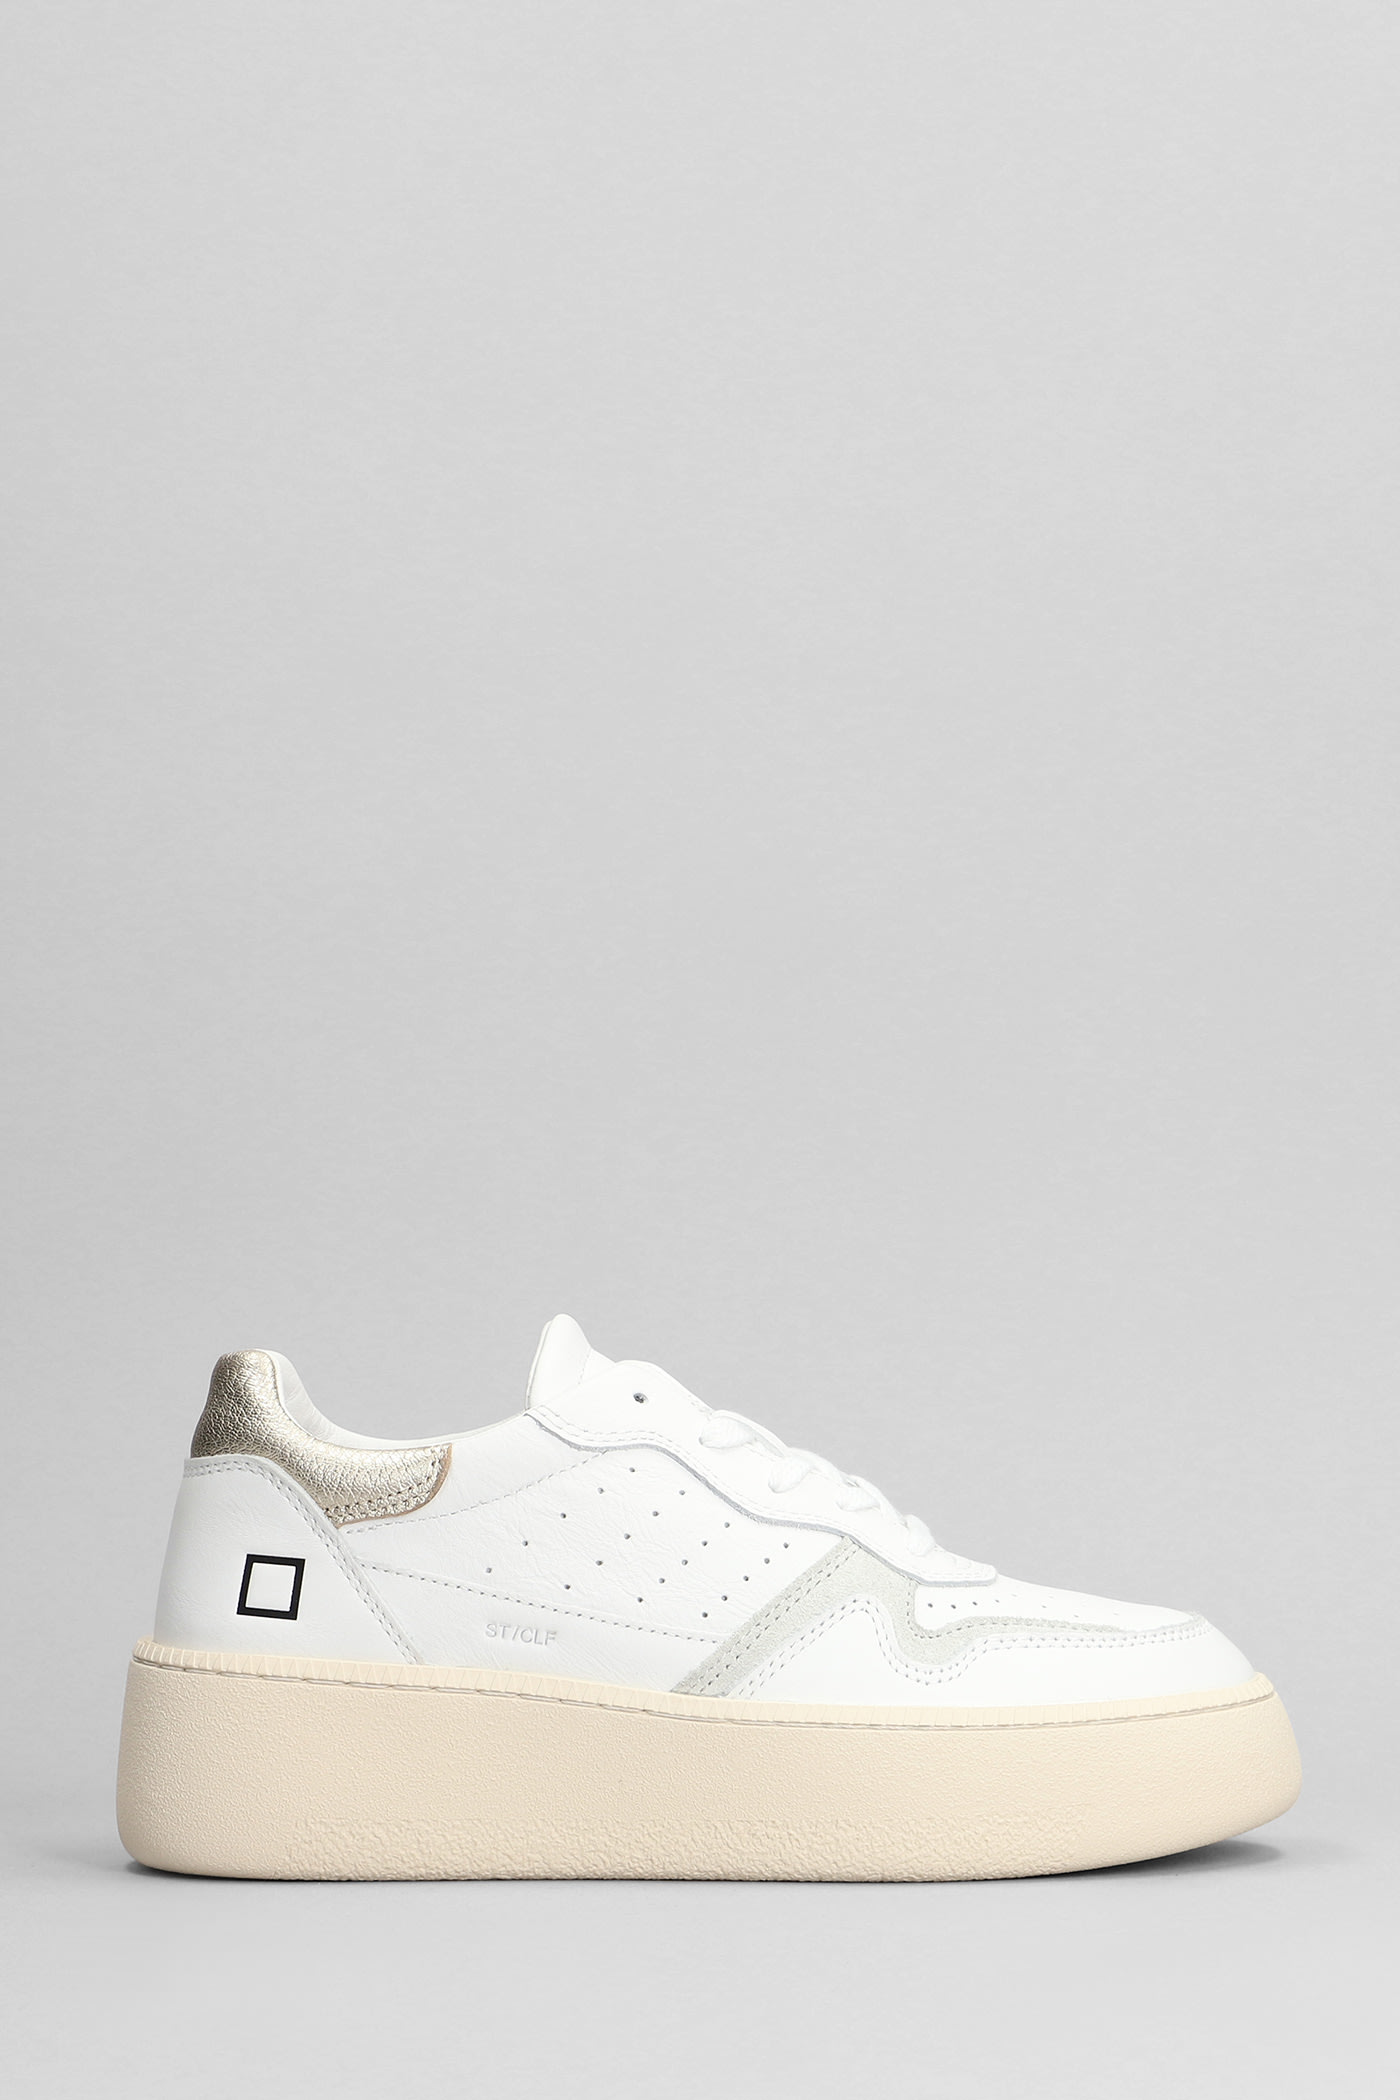 Shop Date Step Sneakers In White Leather